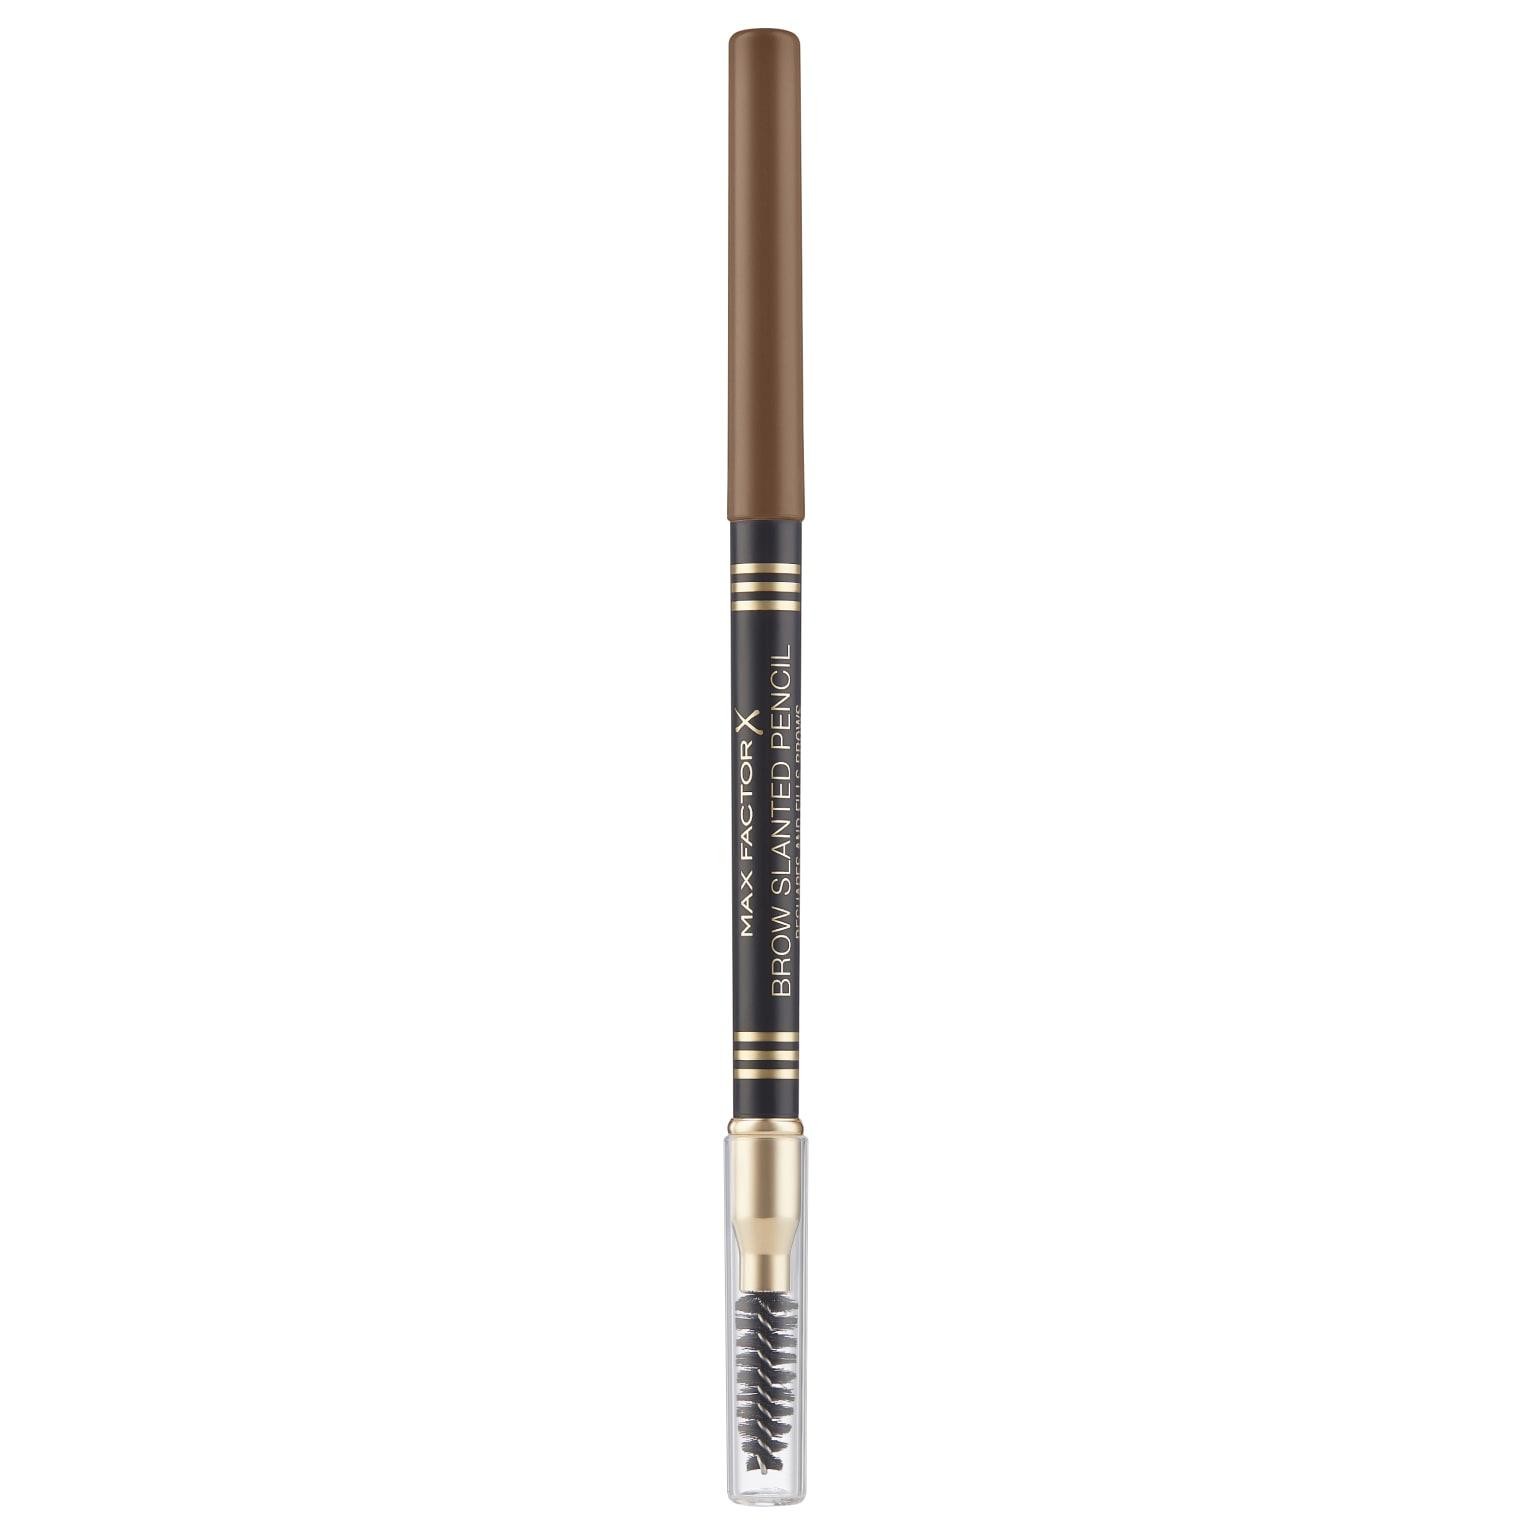 Max Factor Brow Slanted, 002 Soft Brown, 1g